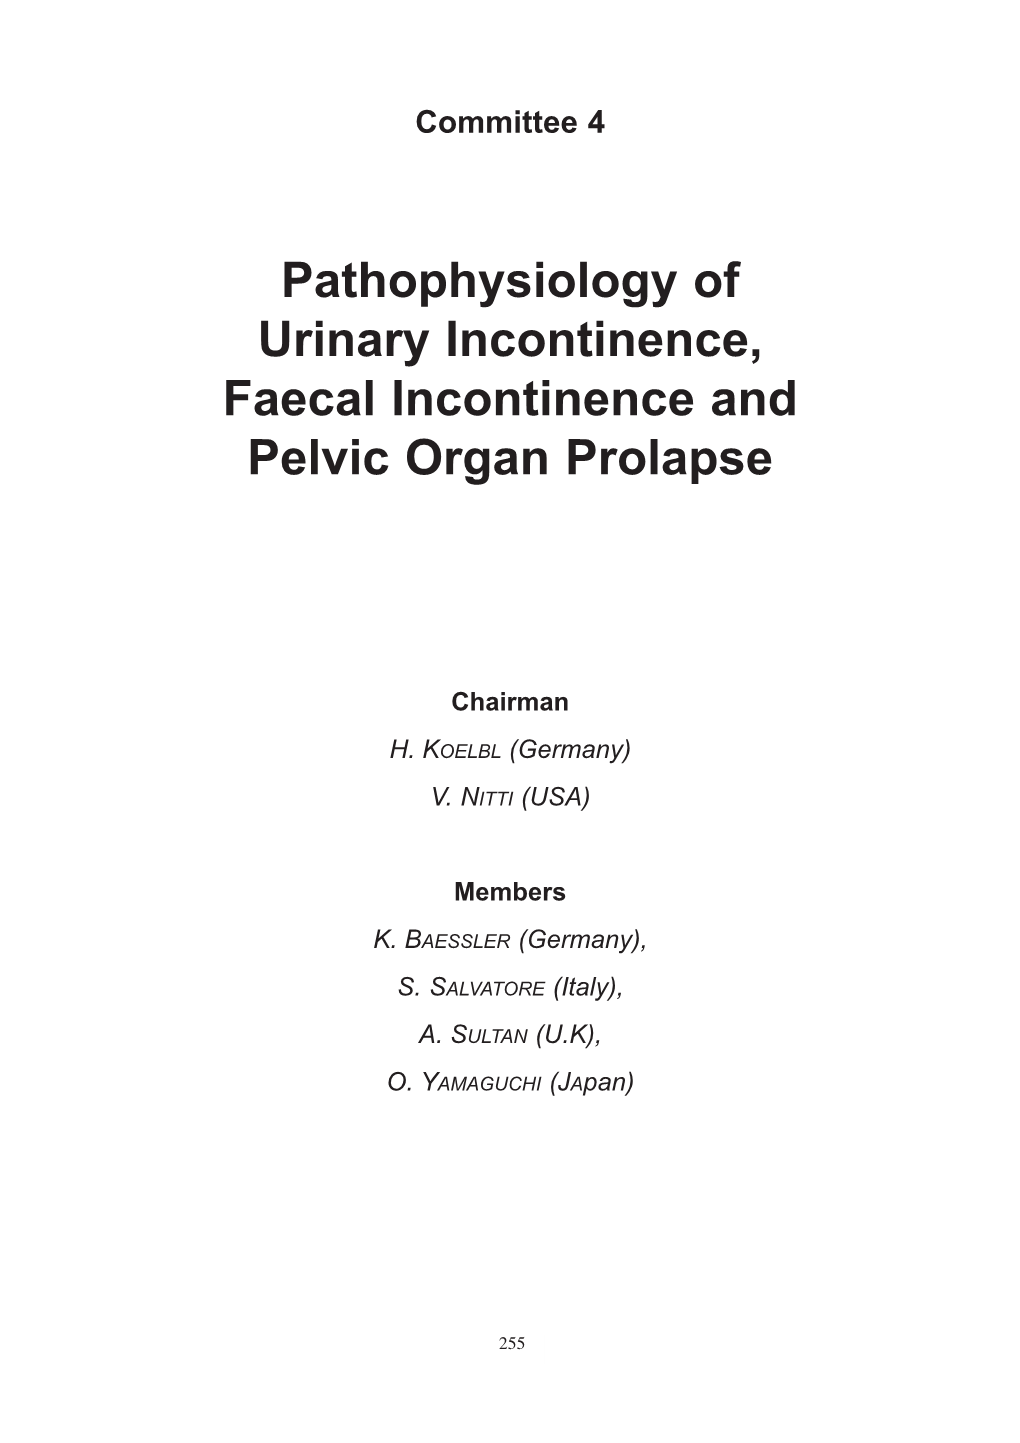 Pathophysiology of Urinary Incontinence, Faecal Incontinence and Pelvic Organ Prolapse